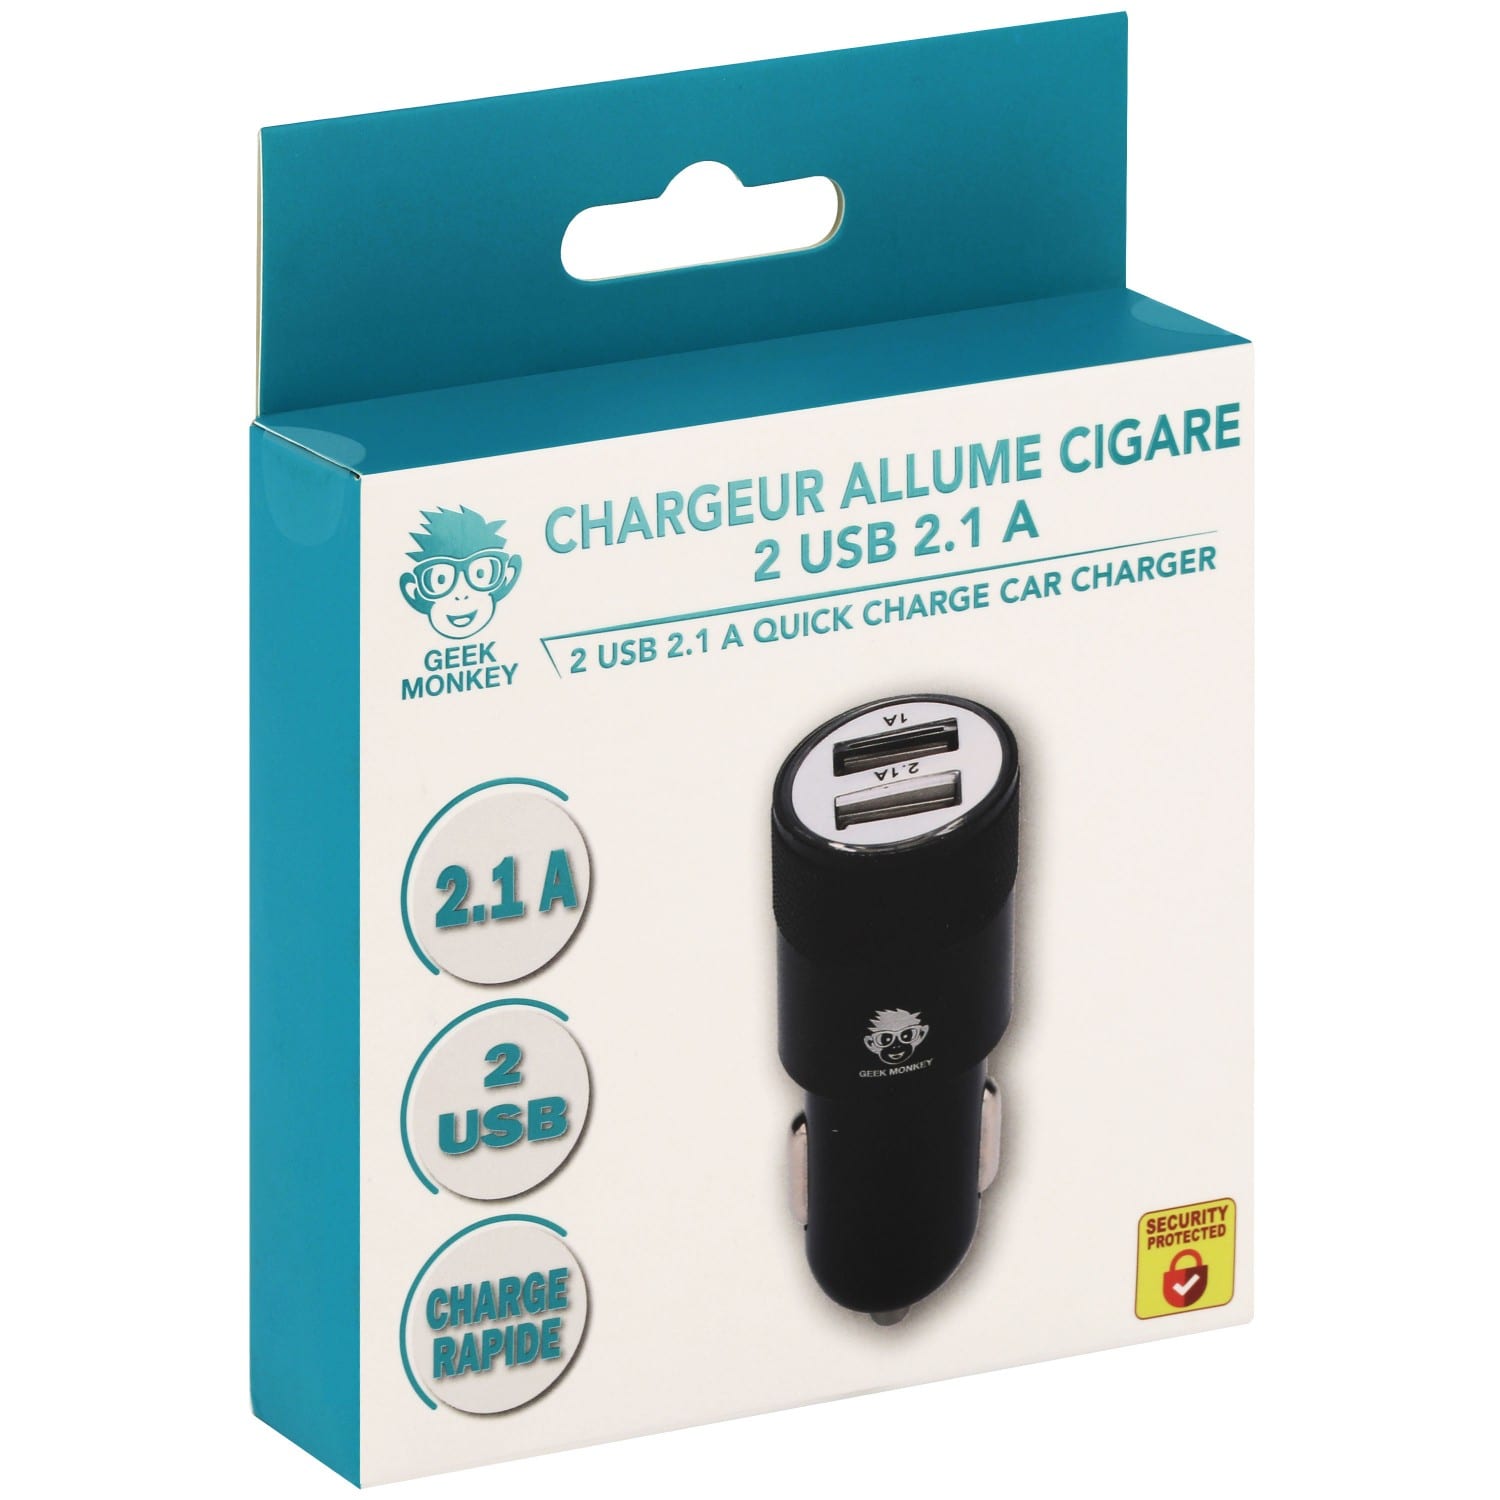 Chargeur GEEK MONKEY allume-cigare - 2x USB-A 2.1 - Charge rapide - Noir